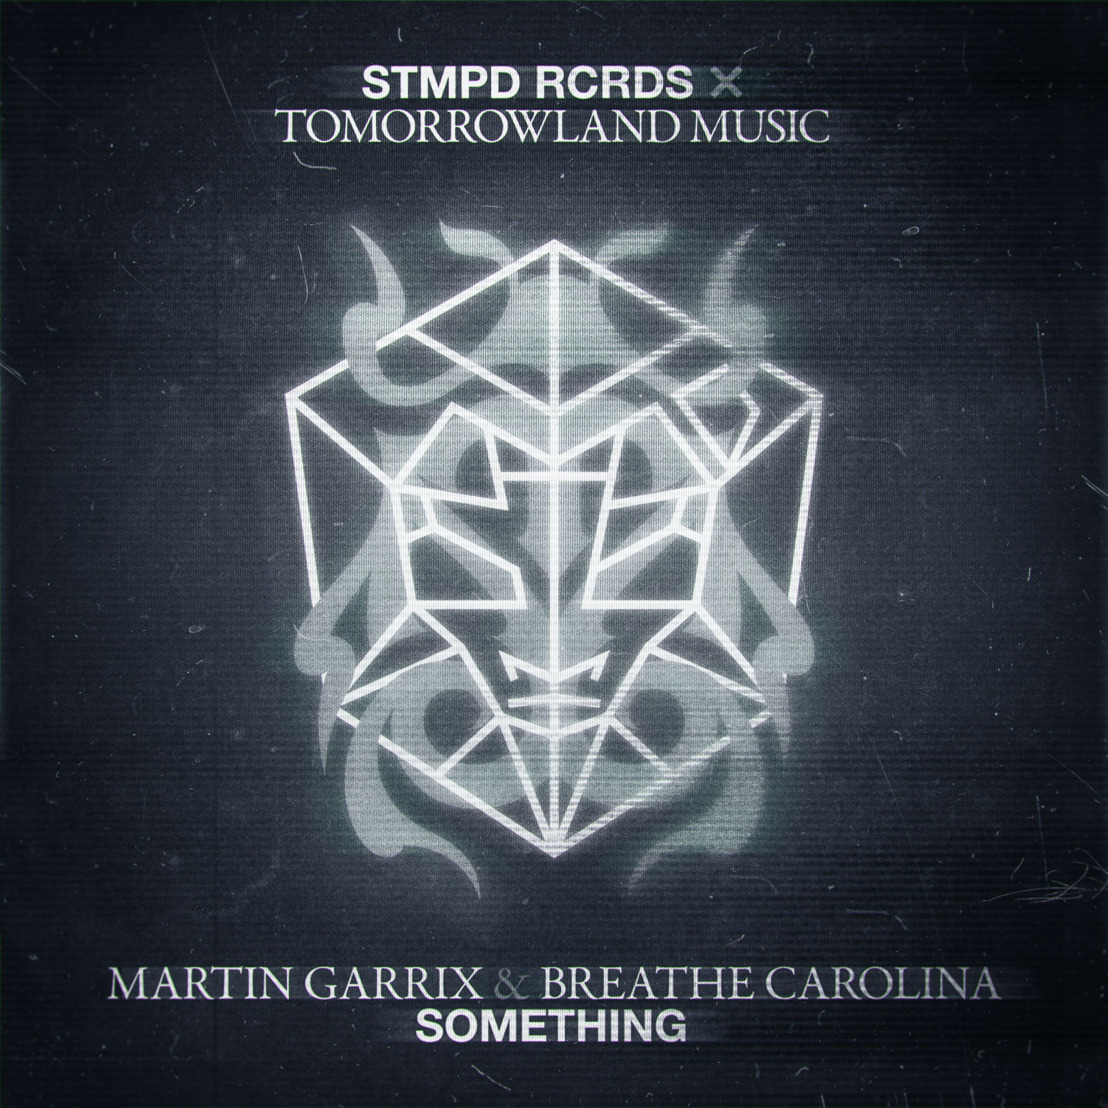 Martin Garrix joins forces with Breathe Carolina for their exciting festival banger ‘Something’